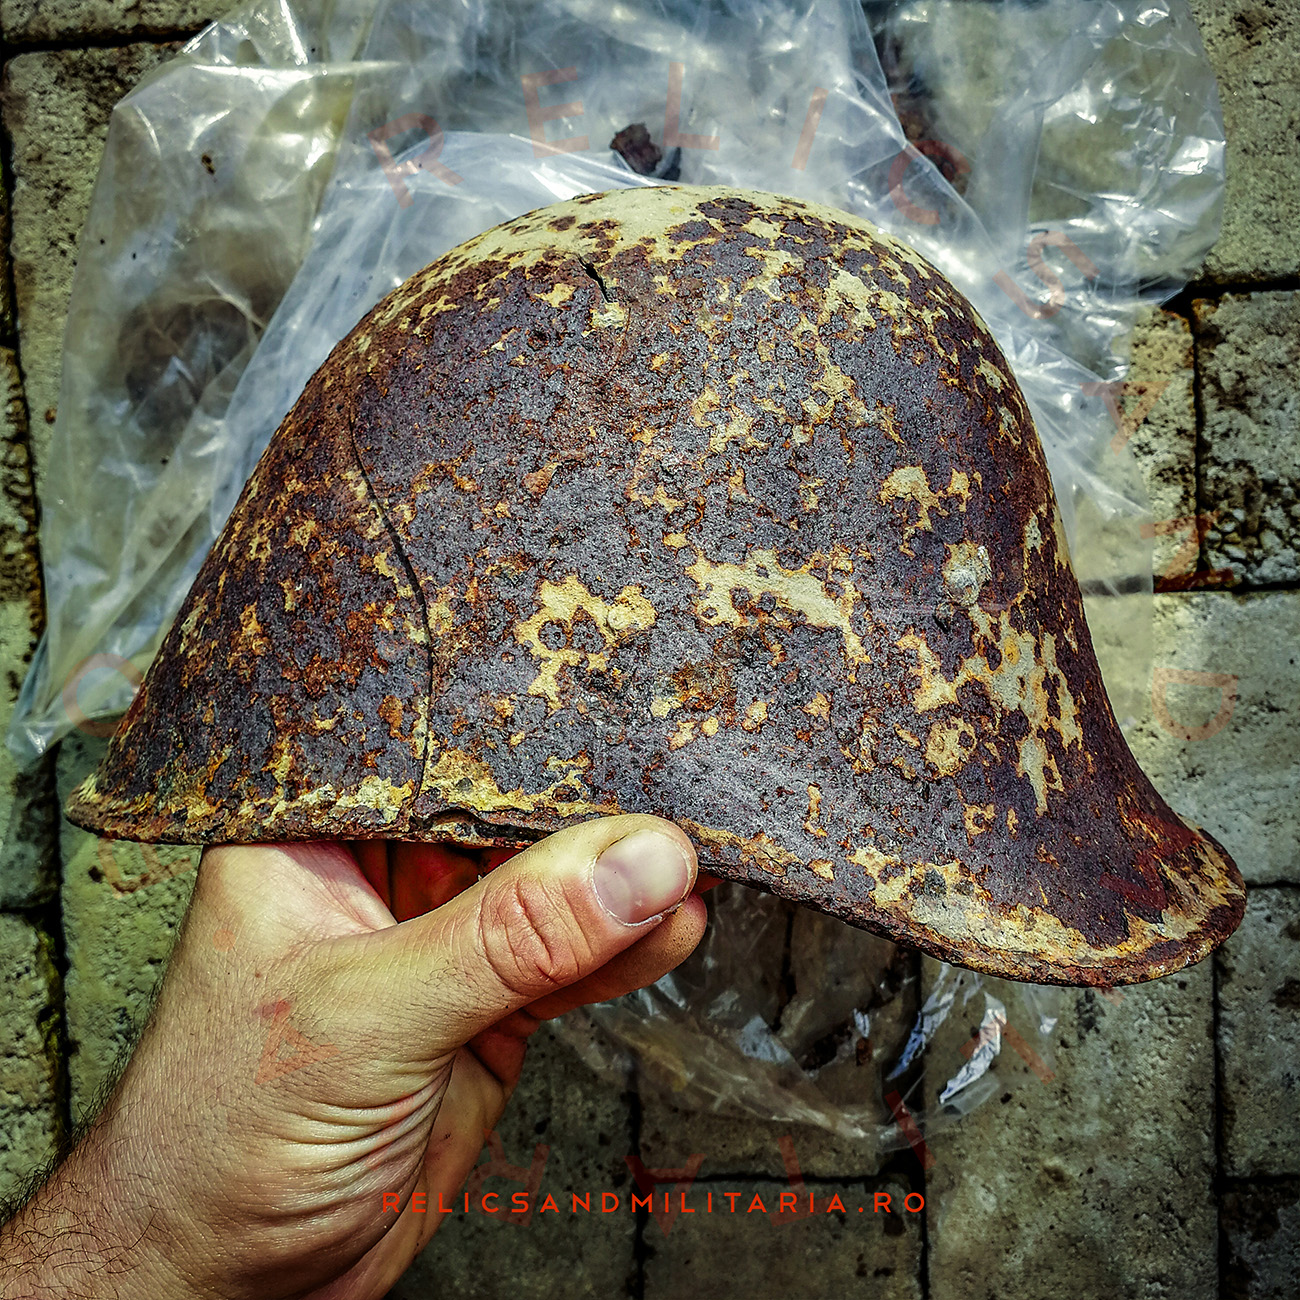 Rust removal from a ww2 helmet